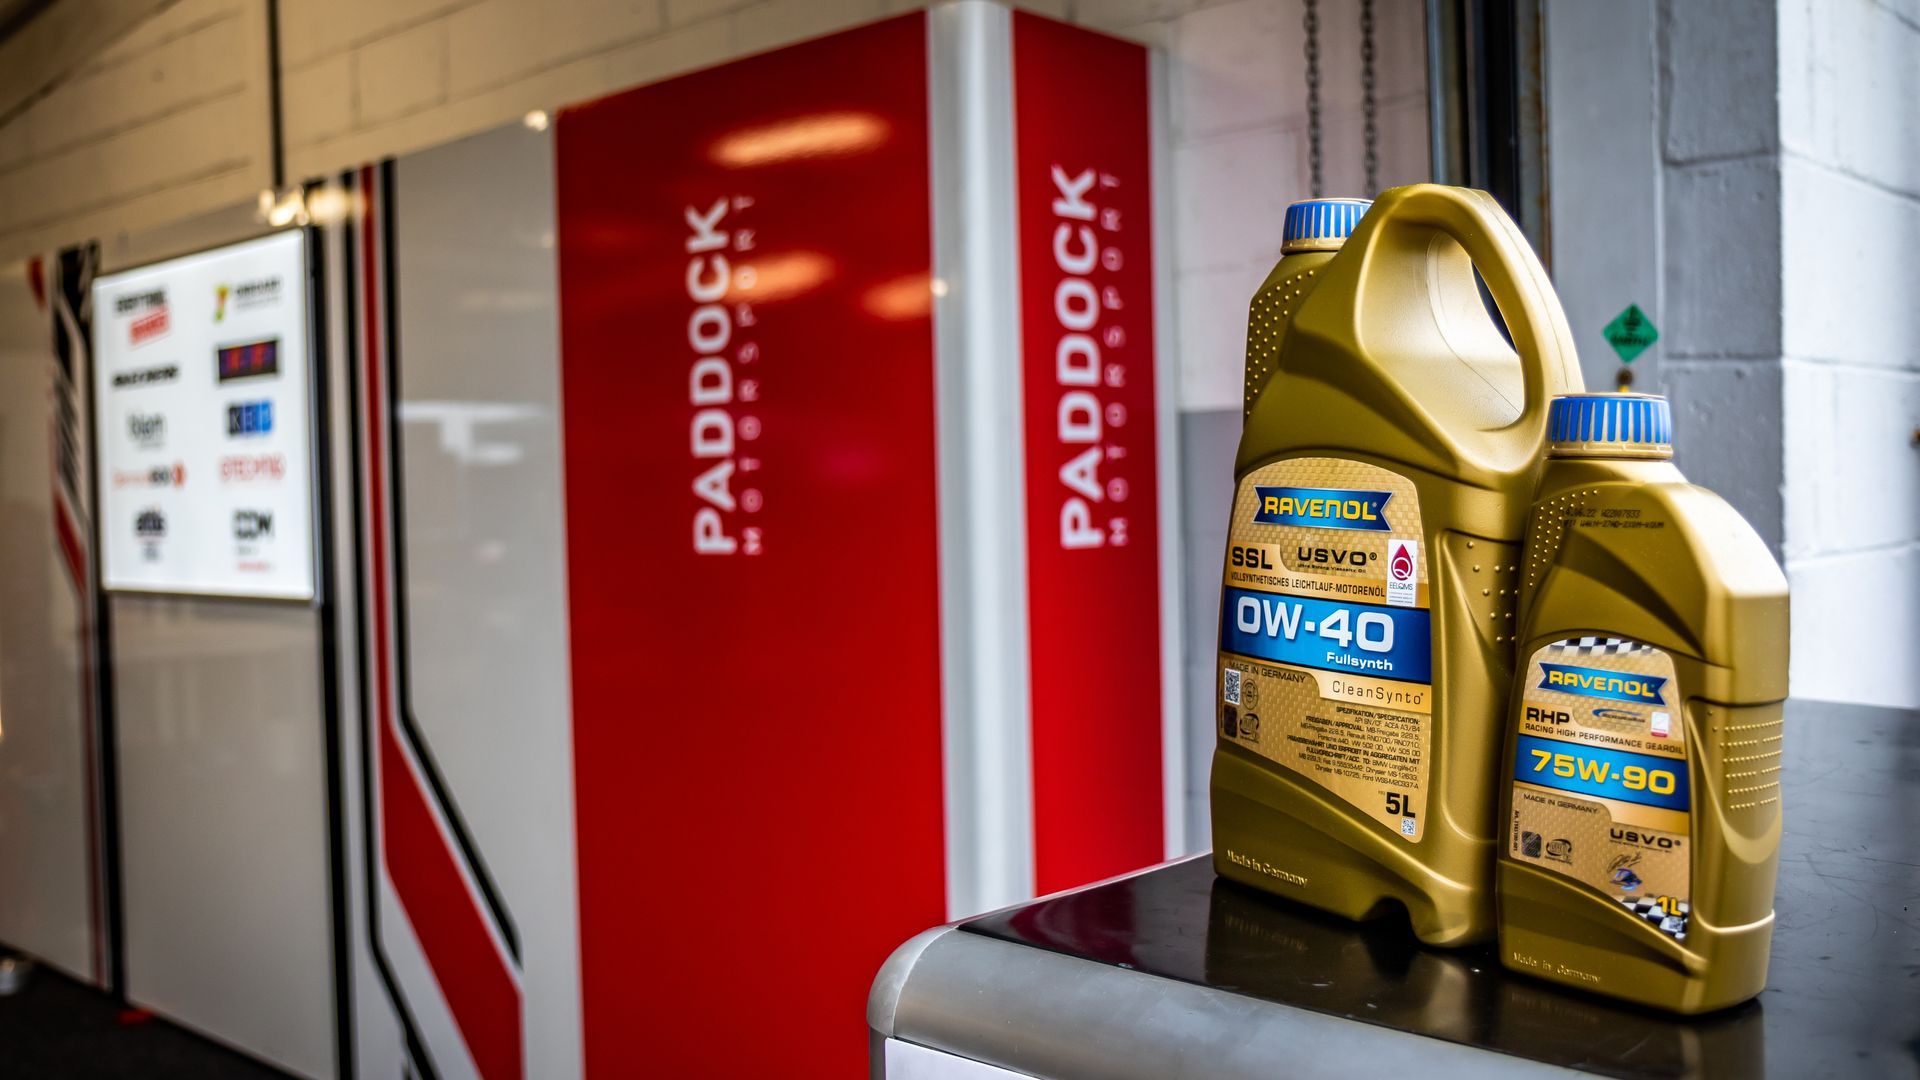 A selection of Ravenol products in the Paddock Motorsport garage